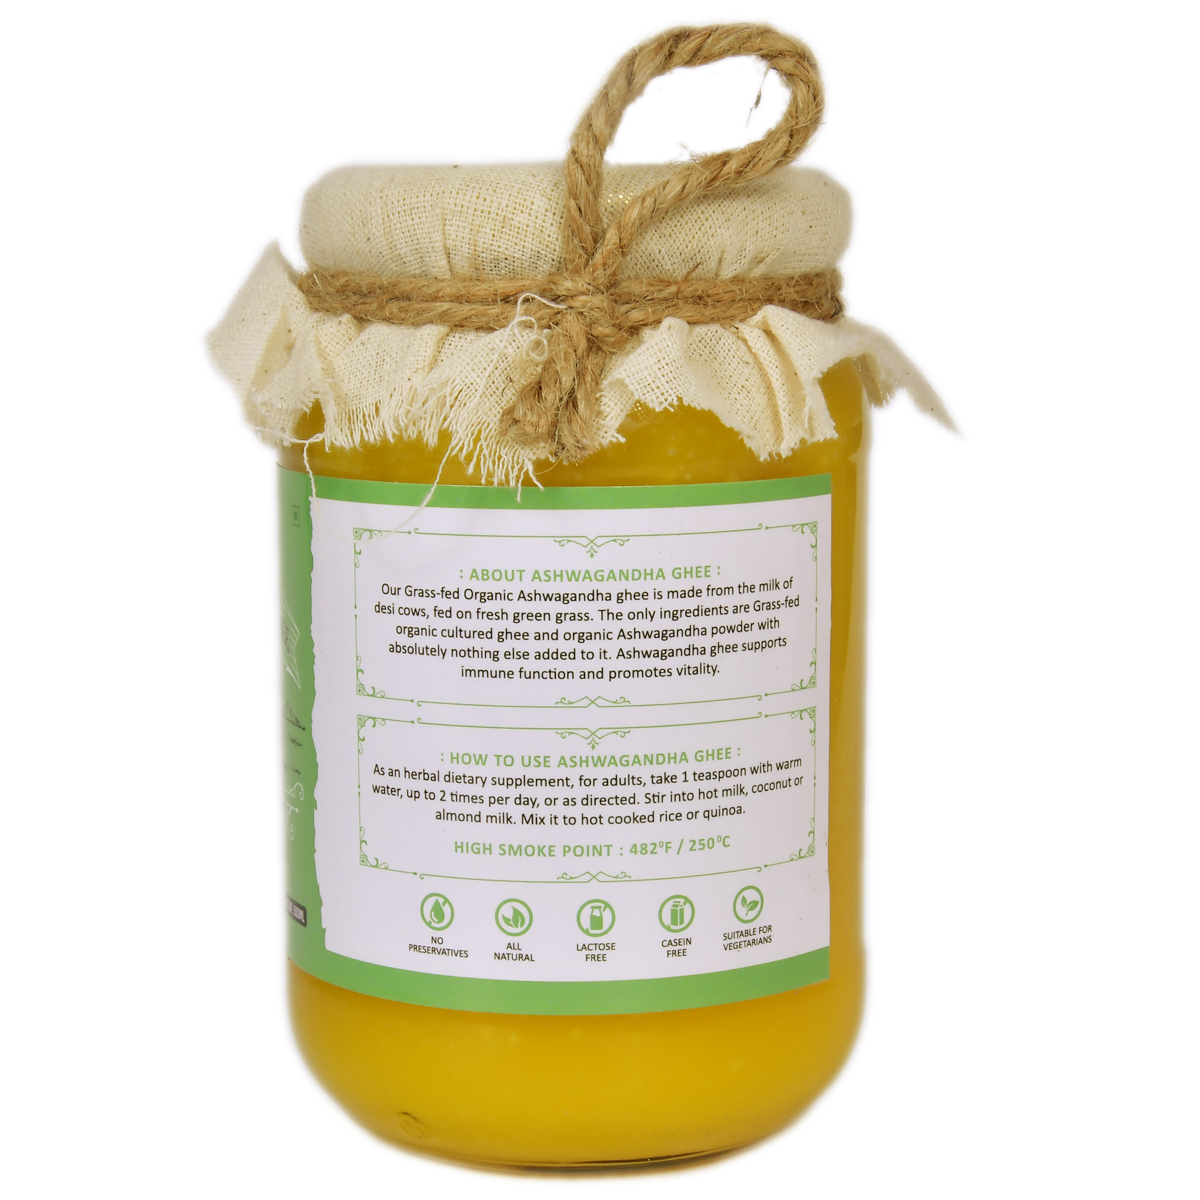 Picture of Vanalaya Ashwagandha Infused Desi Cow Ghee Mixed with Ashwagandha Extract for Stress Relief - Rejuvenates Mind & Body -500ml